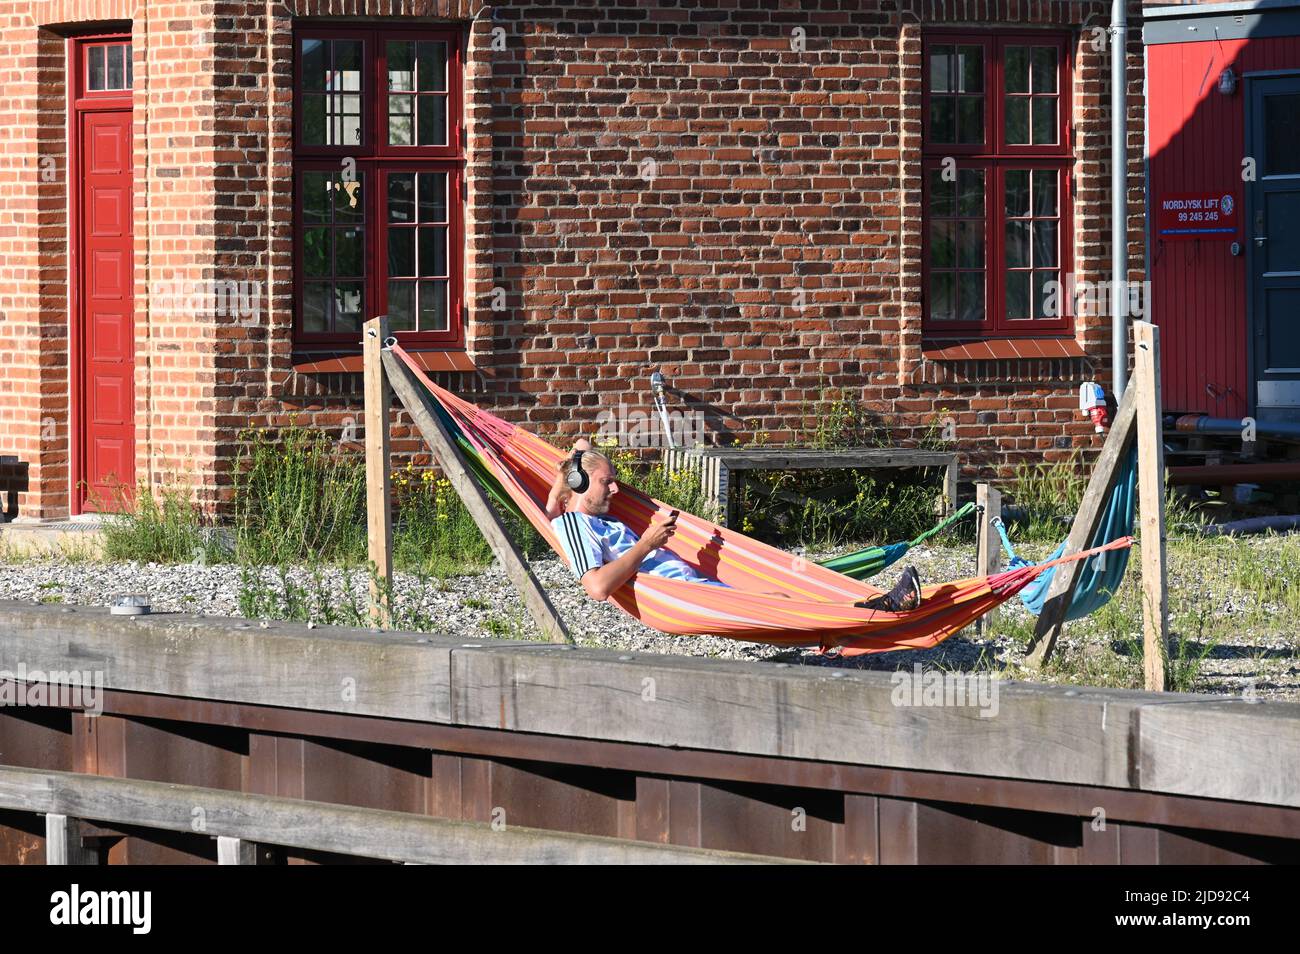 Man in a hammock in front of a red brick facade Stock Photo